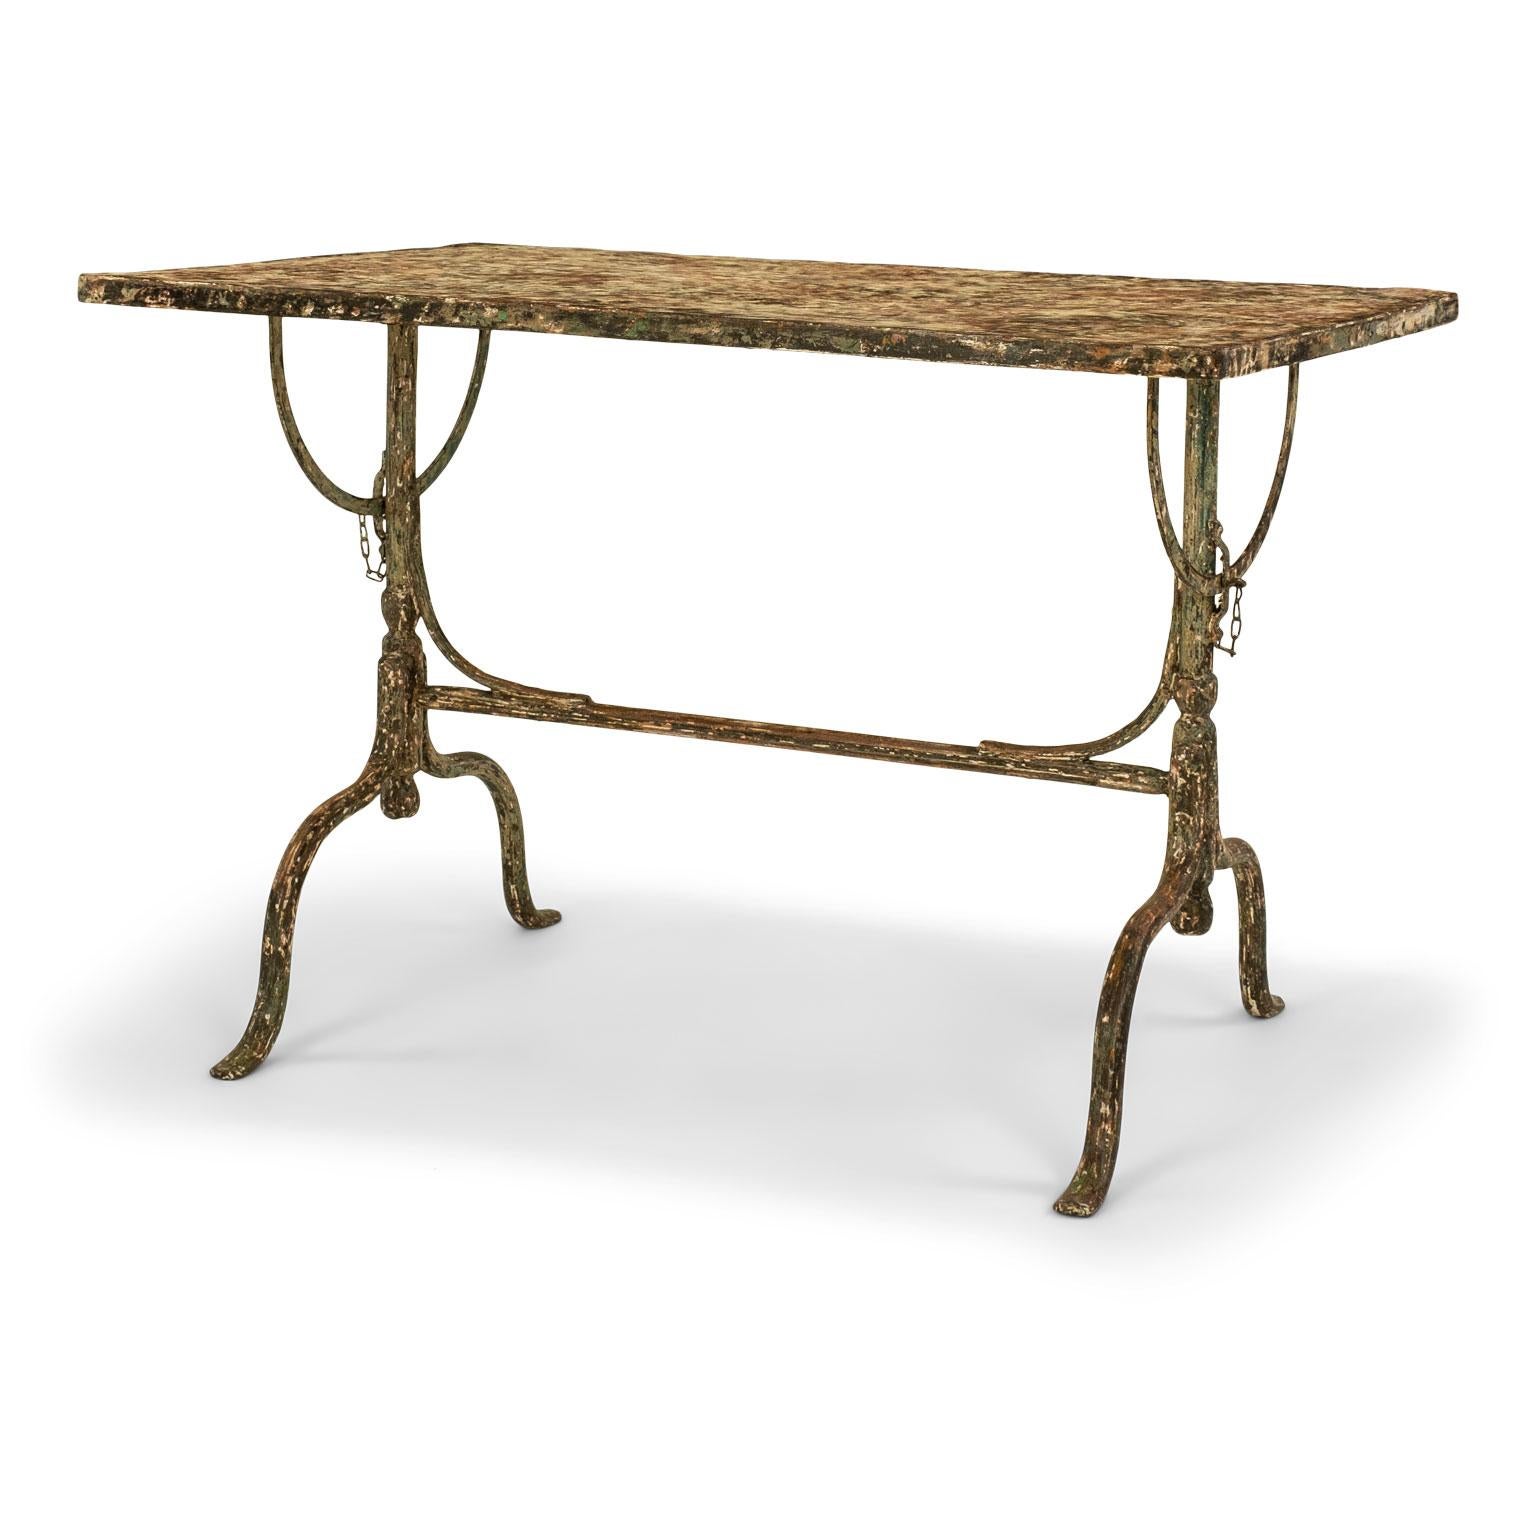 Rectangular painted iron tilt-top: late 19th century iron garden table. Rectangular steel top upon cast iron trestle base. Scraped to old painted finish. Top tilts upright for easy storage.

Note: Original/early finish on antique and vintage metal